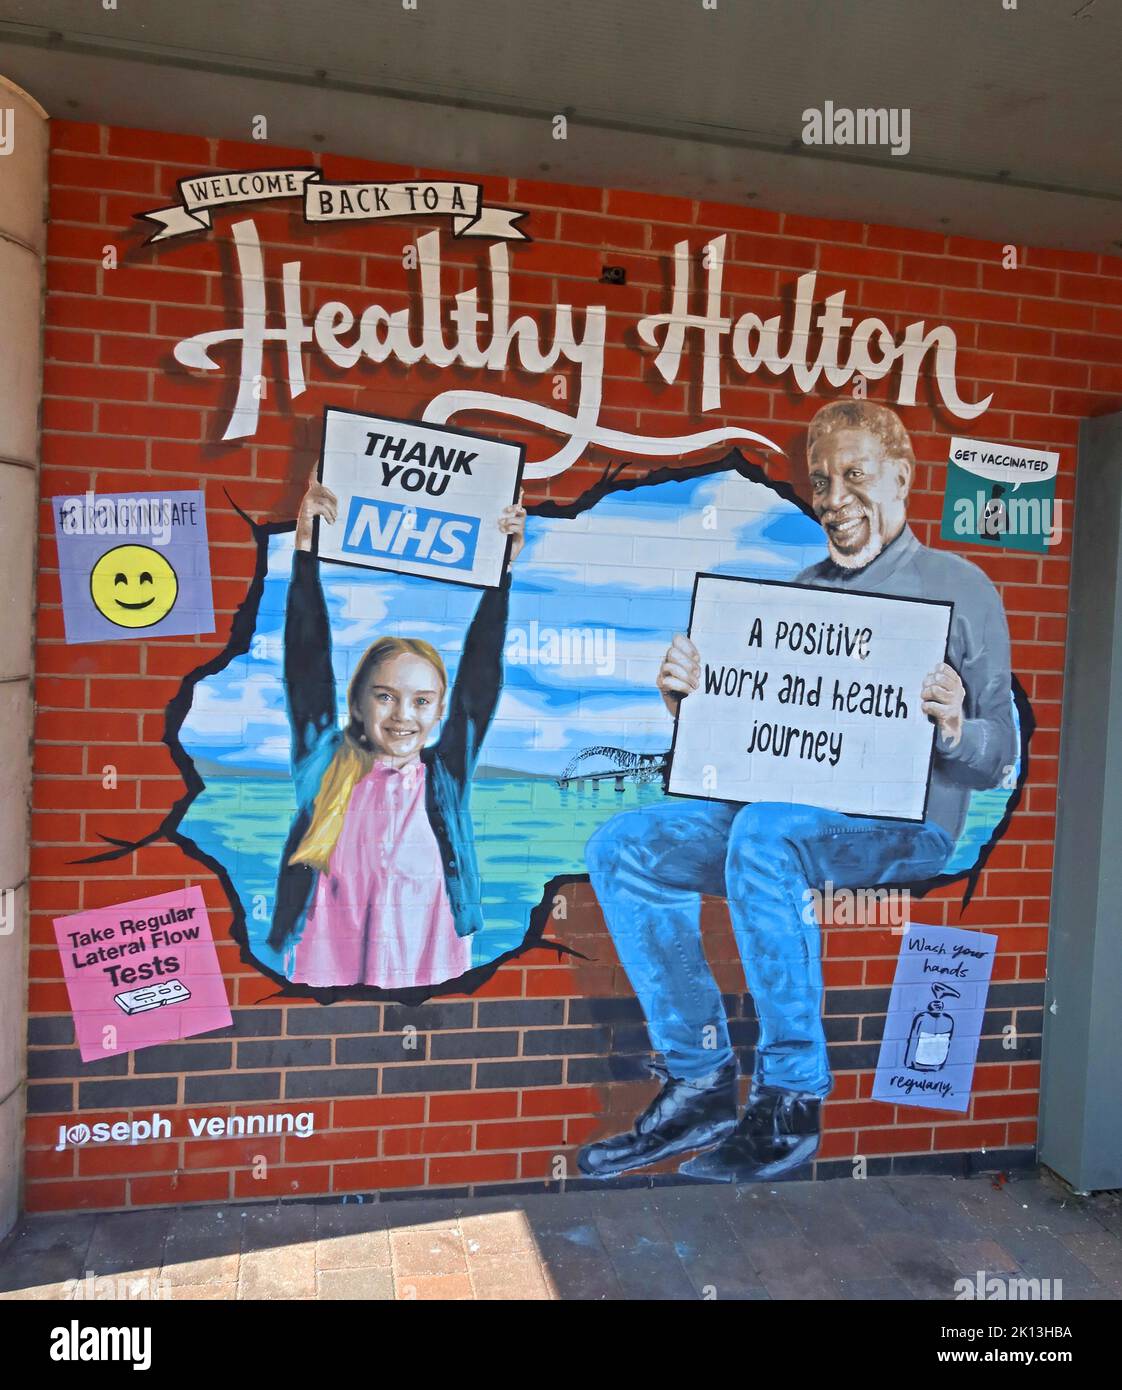 Promoting Welcome back to a Healthy Halton, in Runcorn old town, Halton, Cheshire, England, UK, WA7 1LX Stock Photo